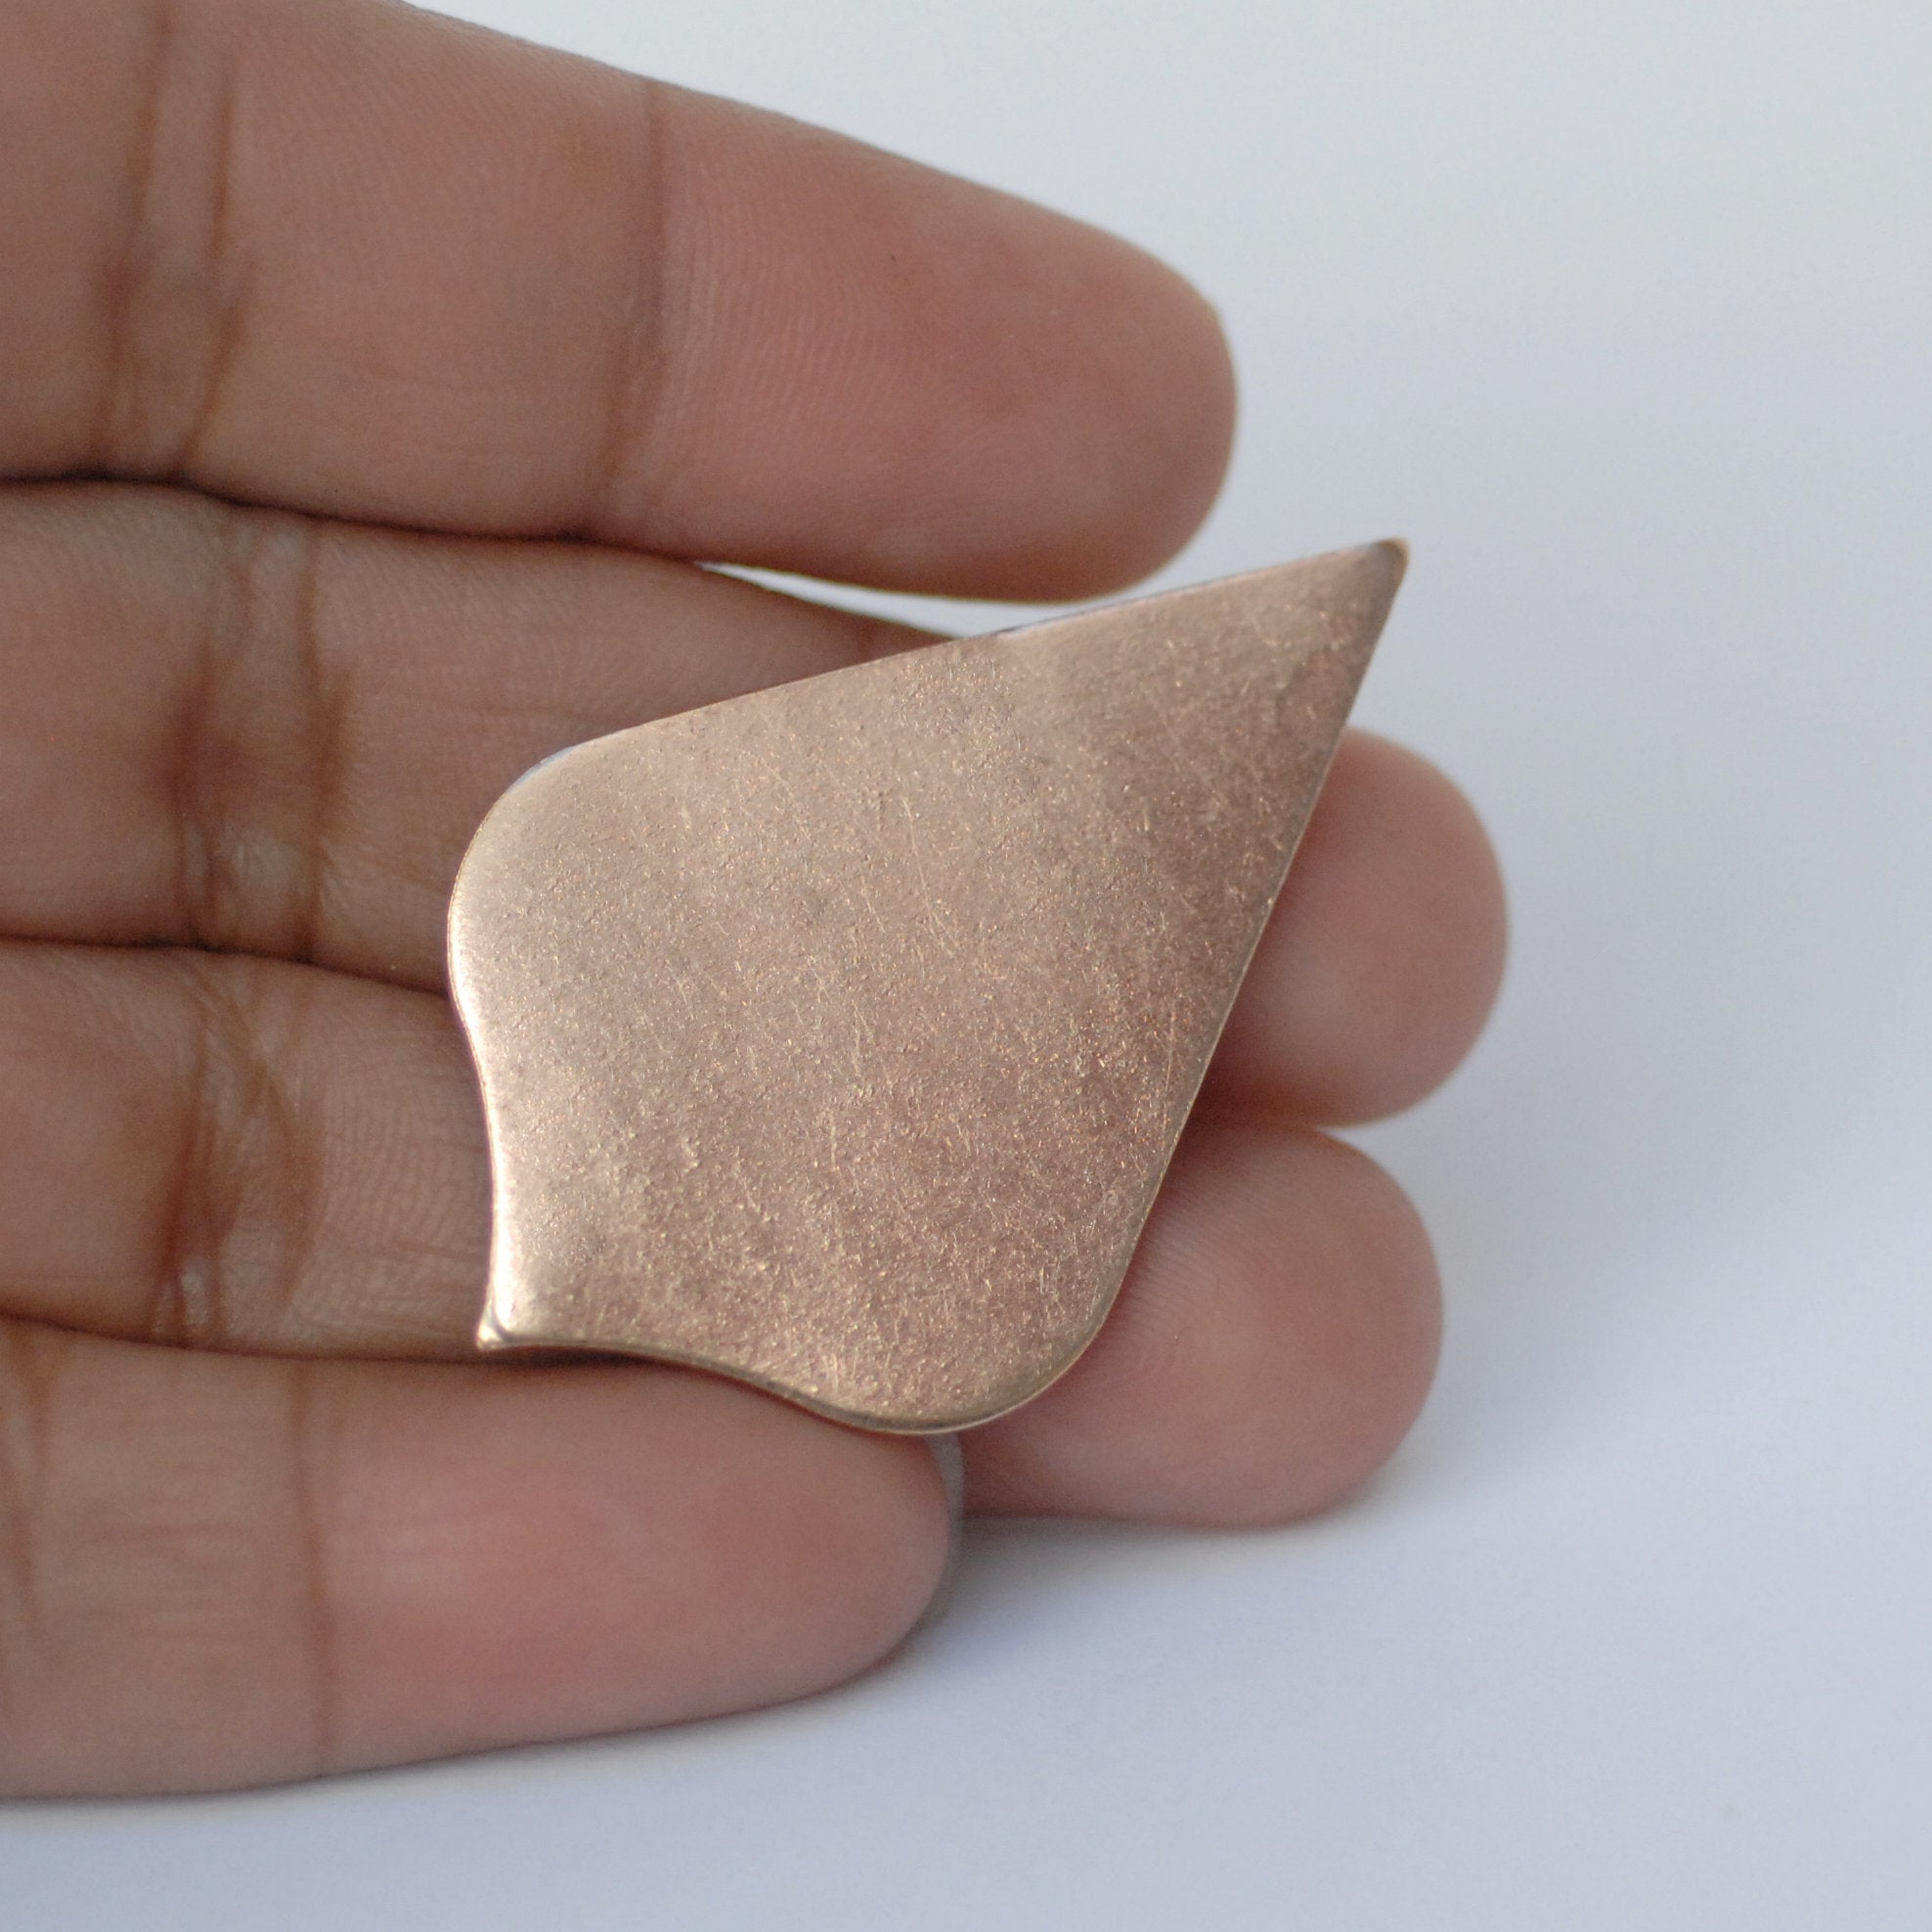 Large Pointed Moroccan Teardrop II Blank Shape for Copper Enameling Hand Stamping Texturing Soldering, Brass, Bronze Blanks